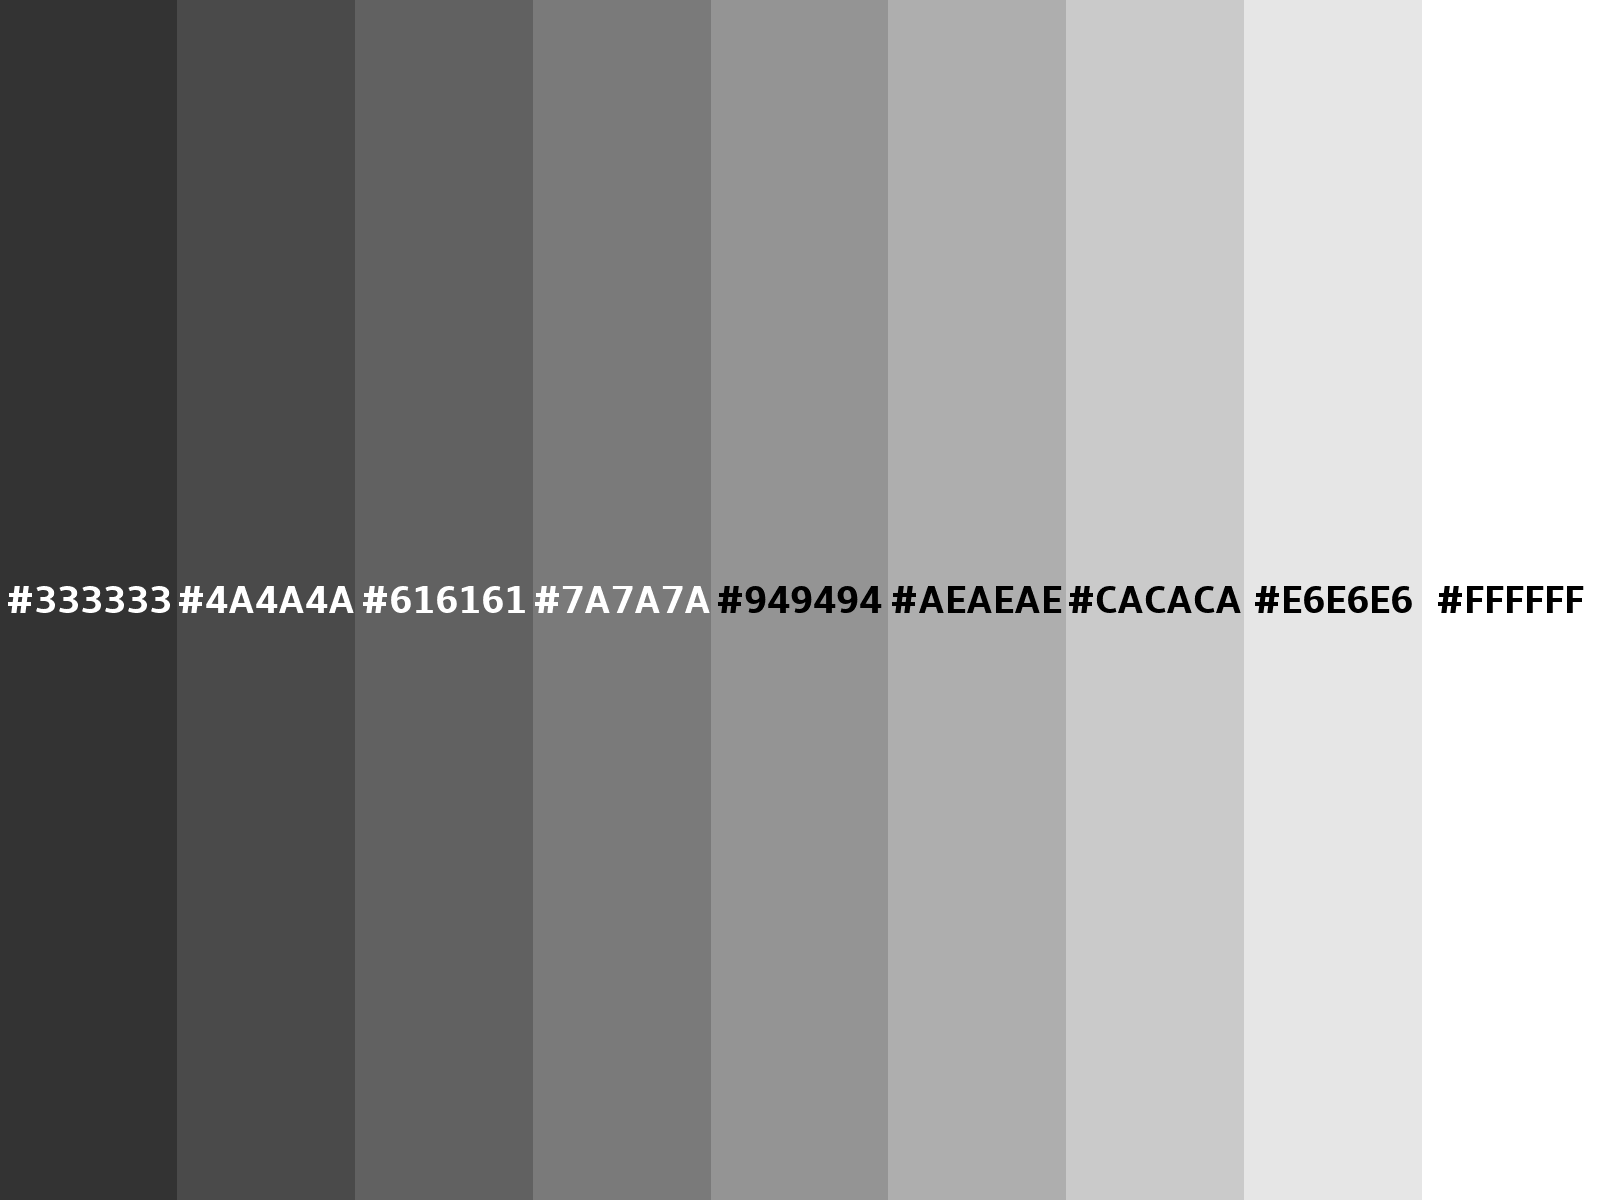 Css color codes for white pooterdas